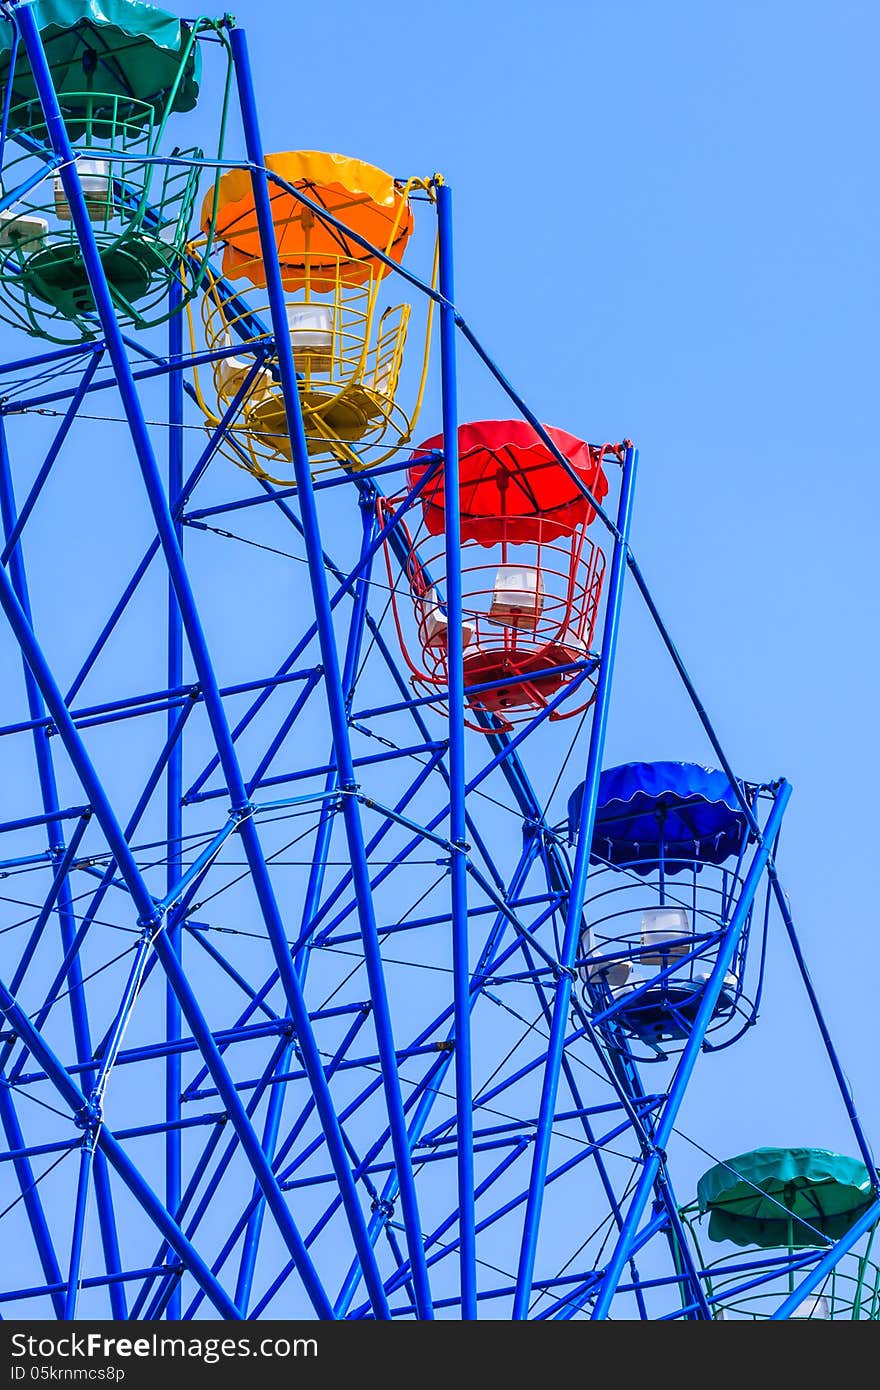 Lonely Colorful Ferris Wheel on Weekend